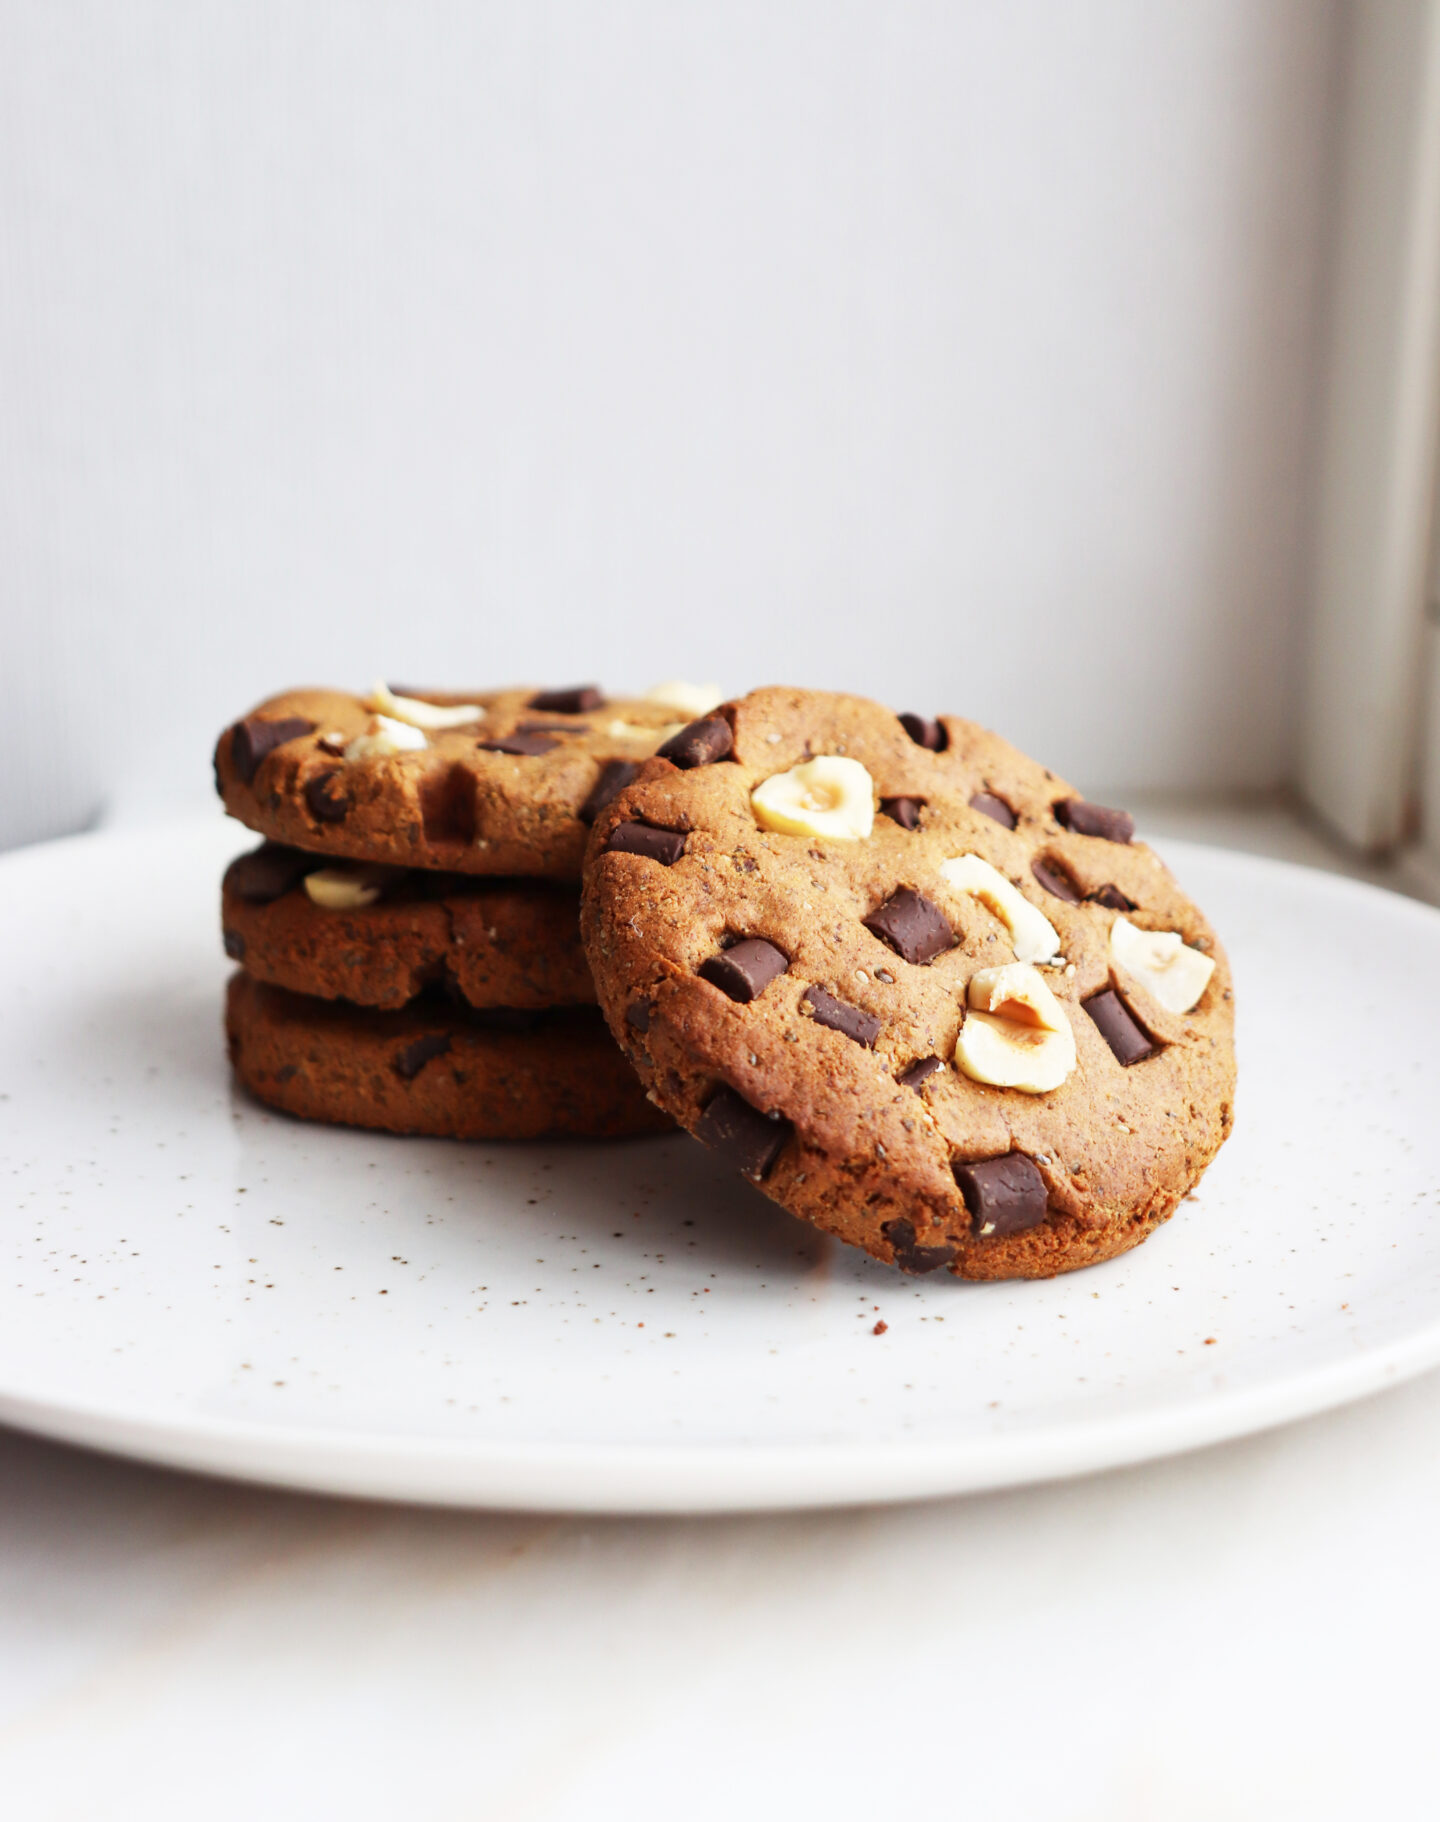 The most fabulous Chestnut Coffee Chocolate Chip cookies